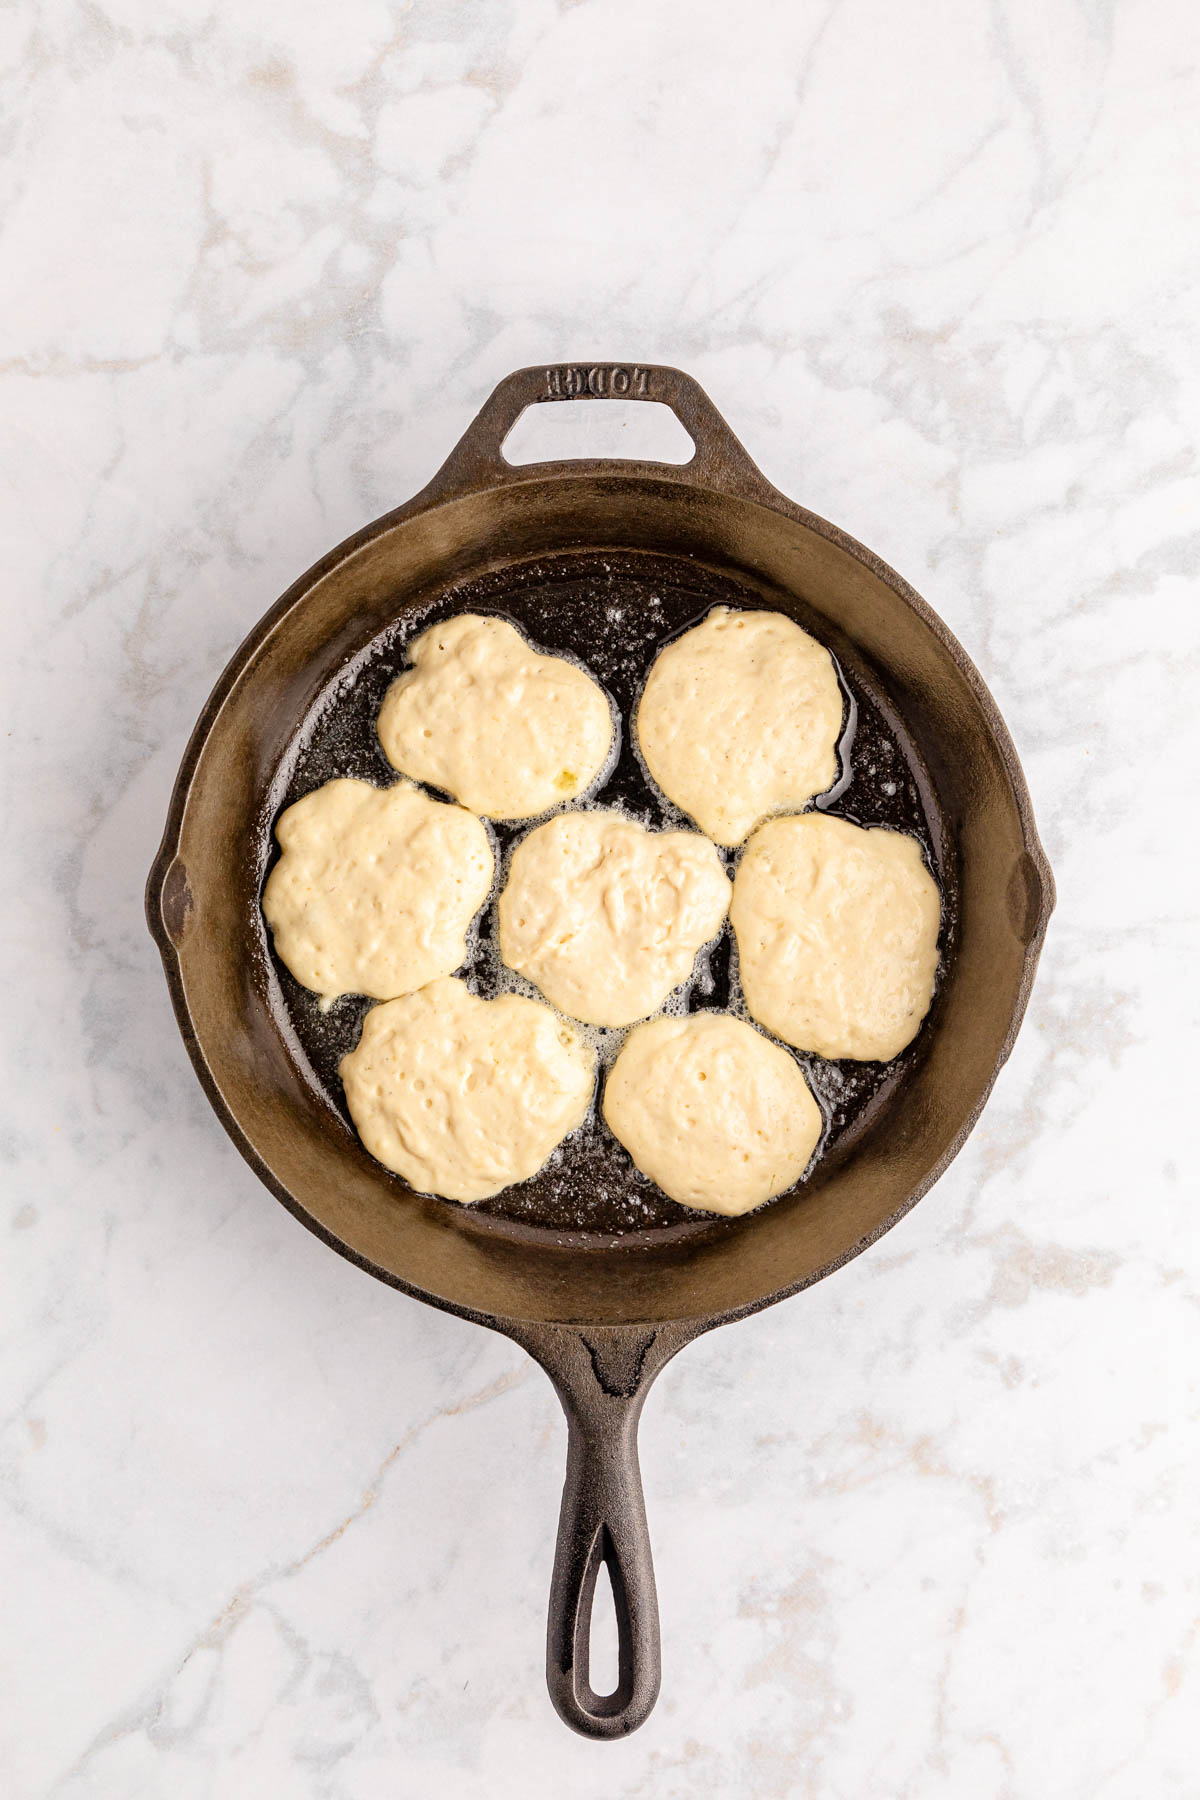 Fried biscuits in a skillet on a marble countertop.